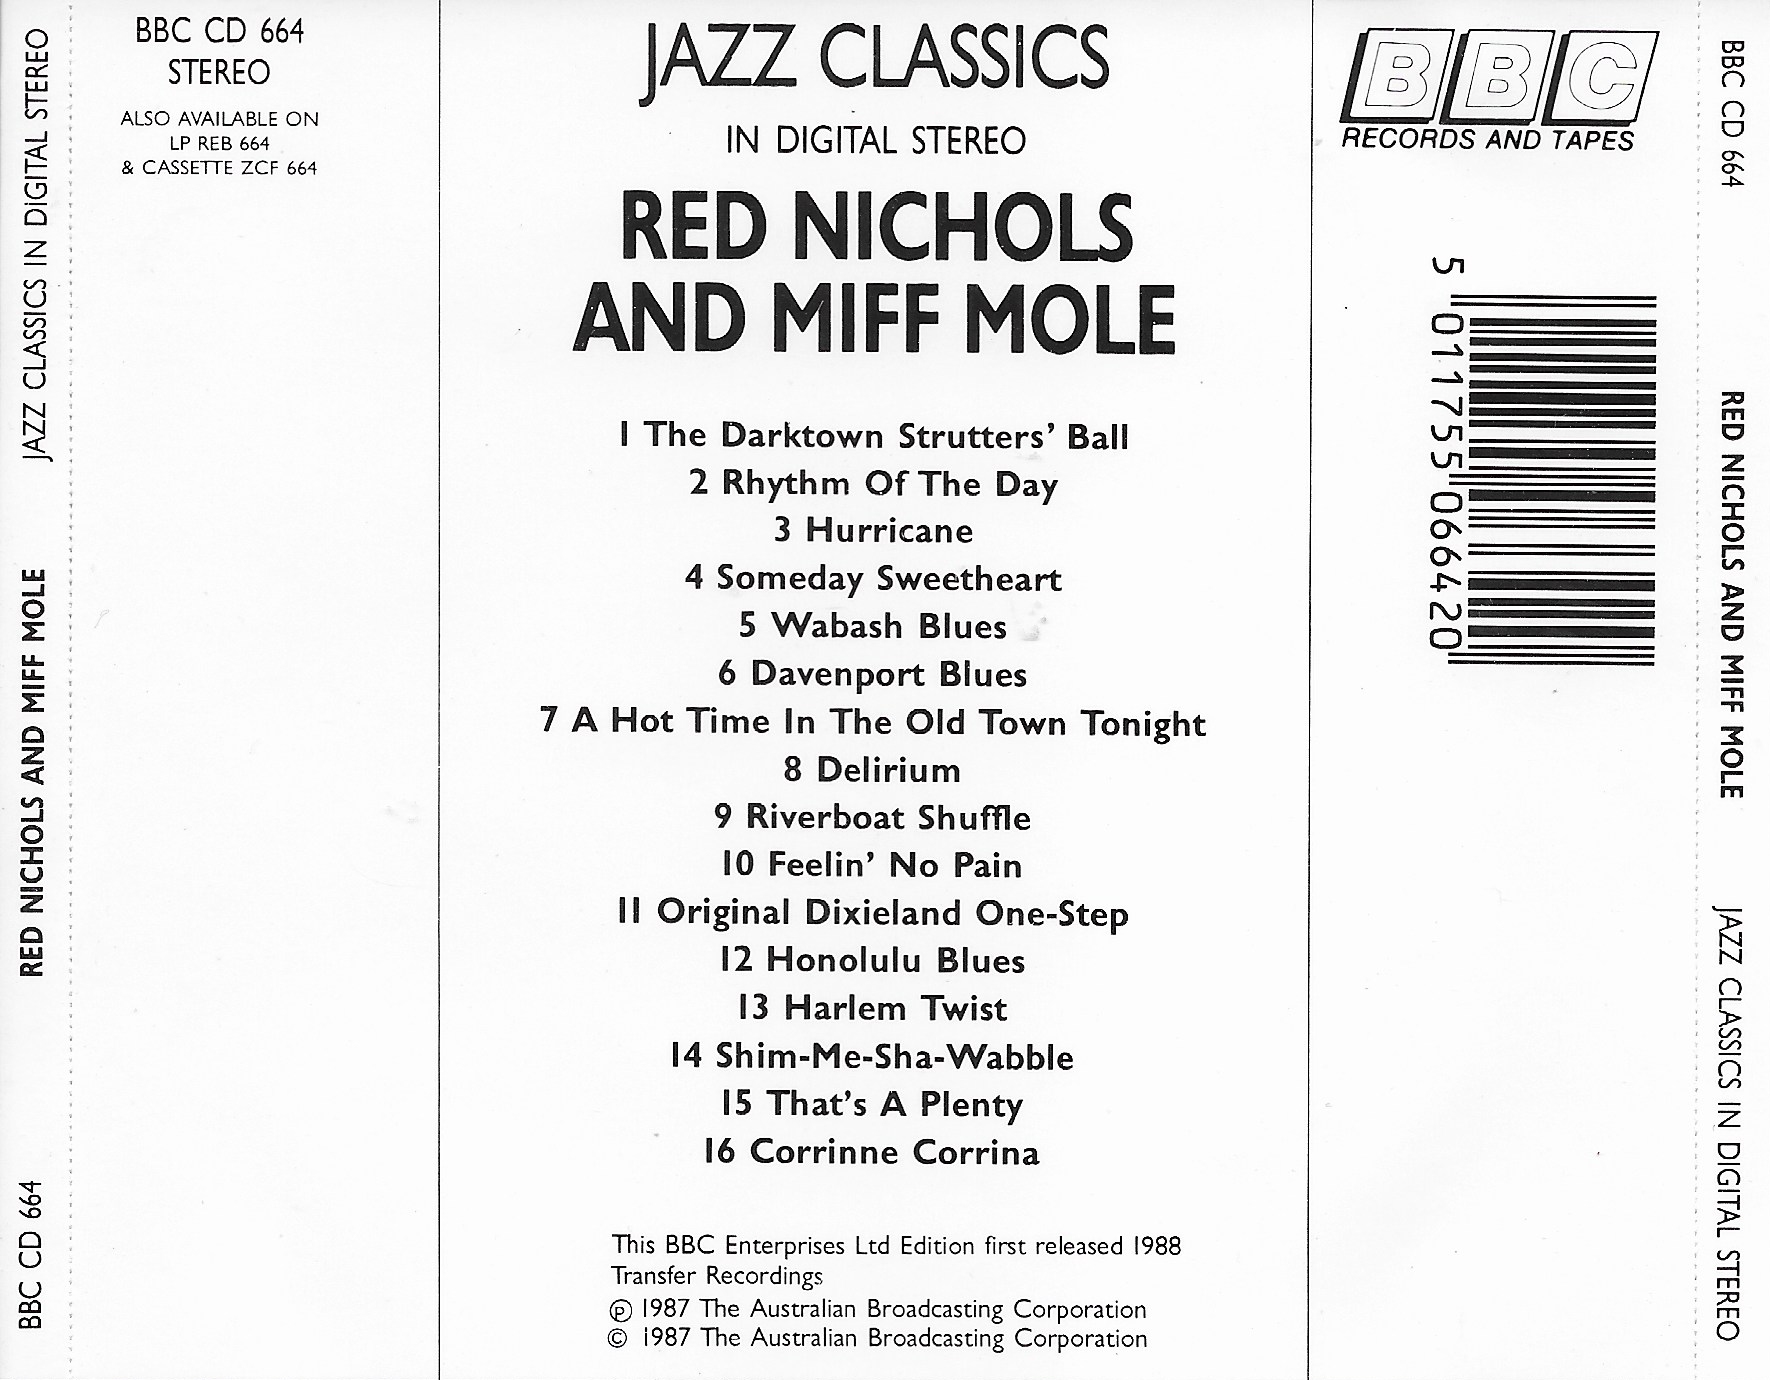 Picture of BBCCD664 Jazz classics - Red Nichols and Miff Mole by artist Nichols / Mole from the BBC records and Tapes library